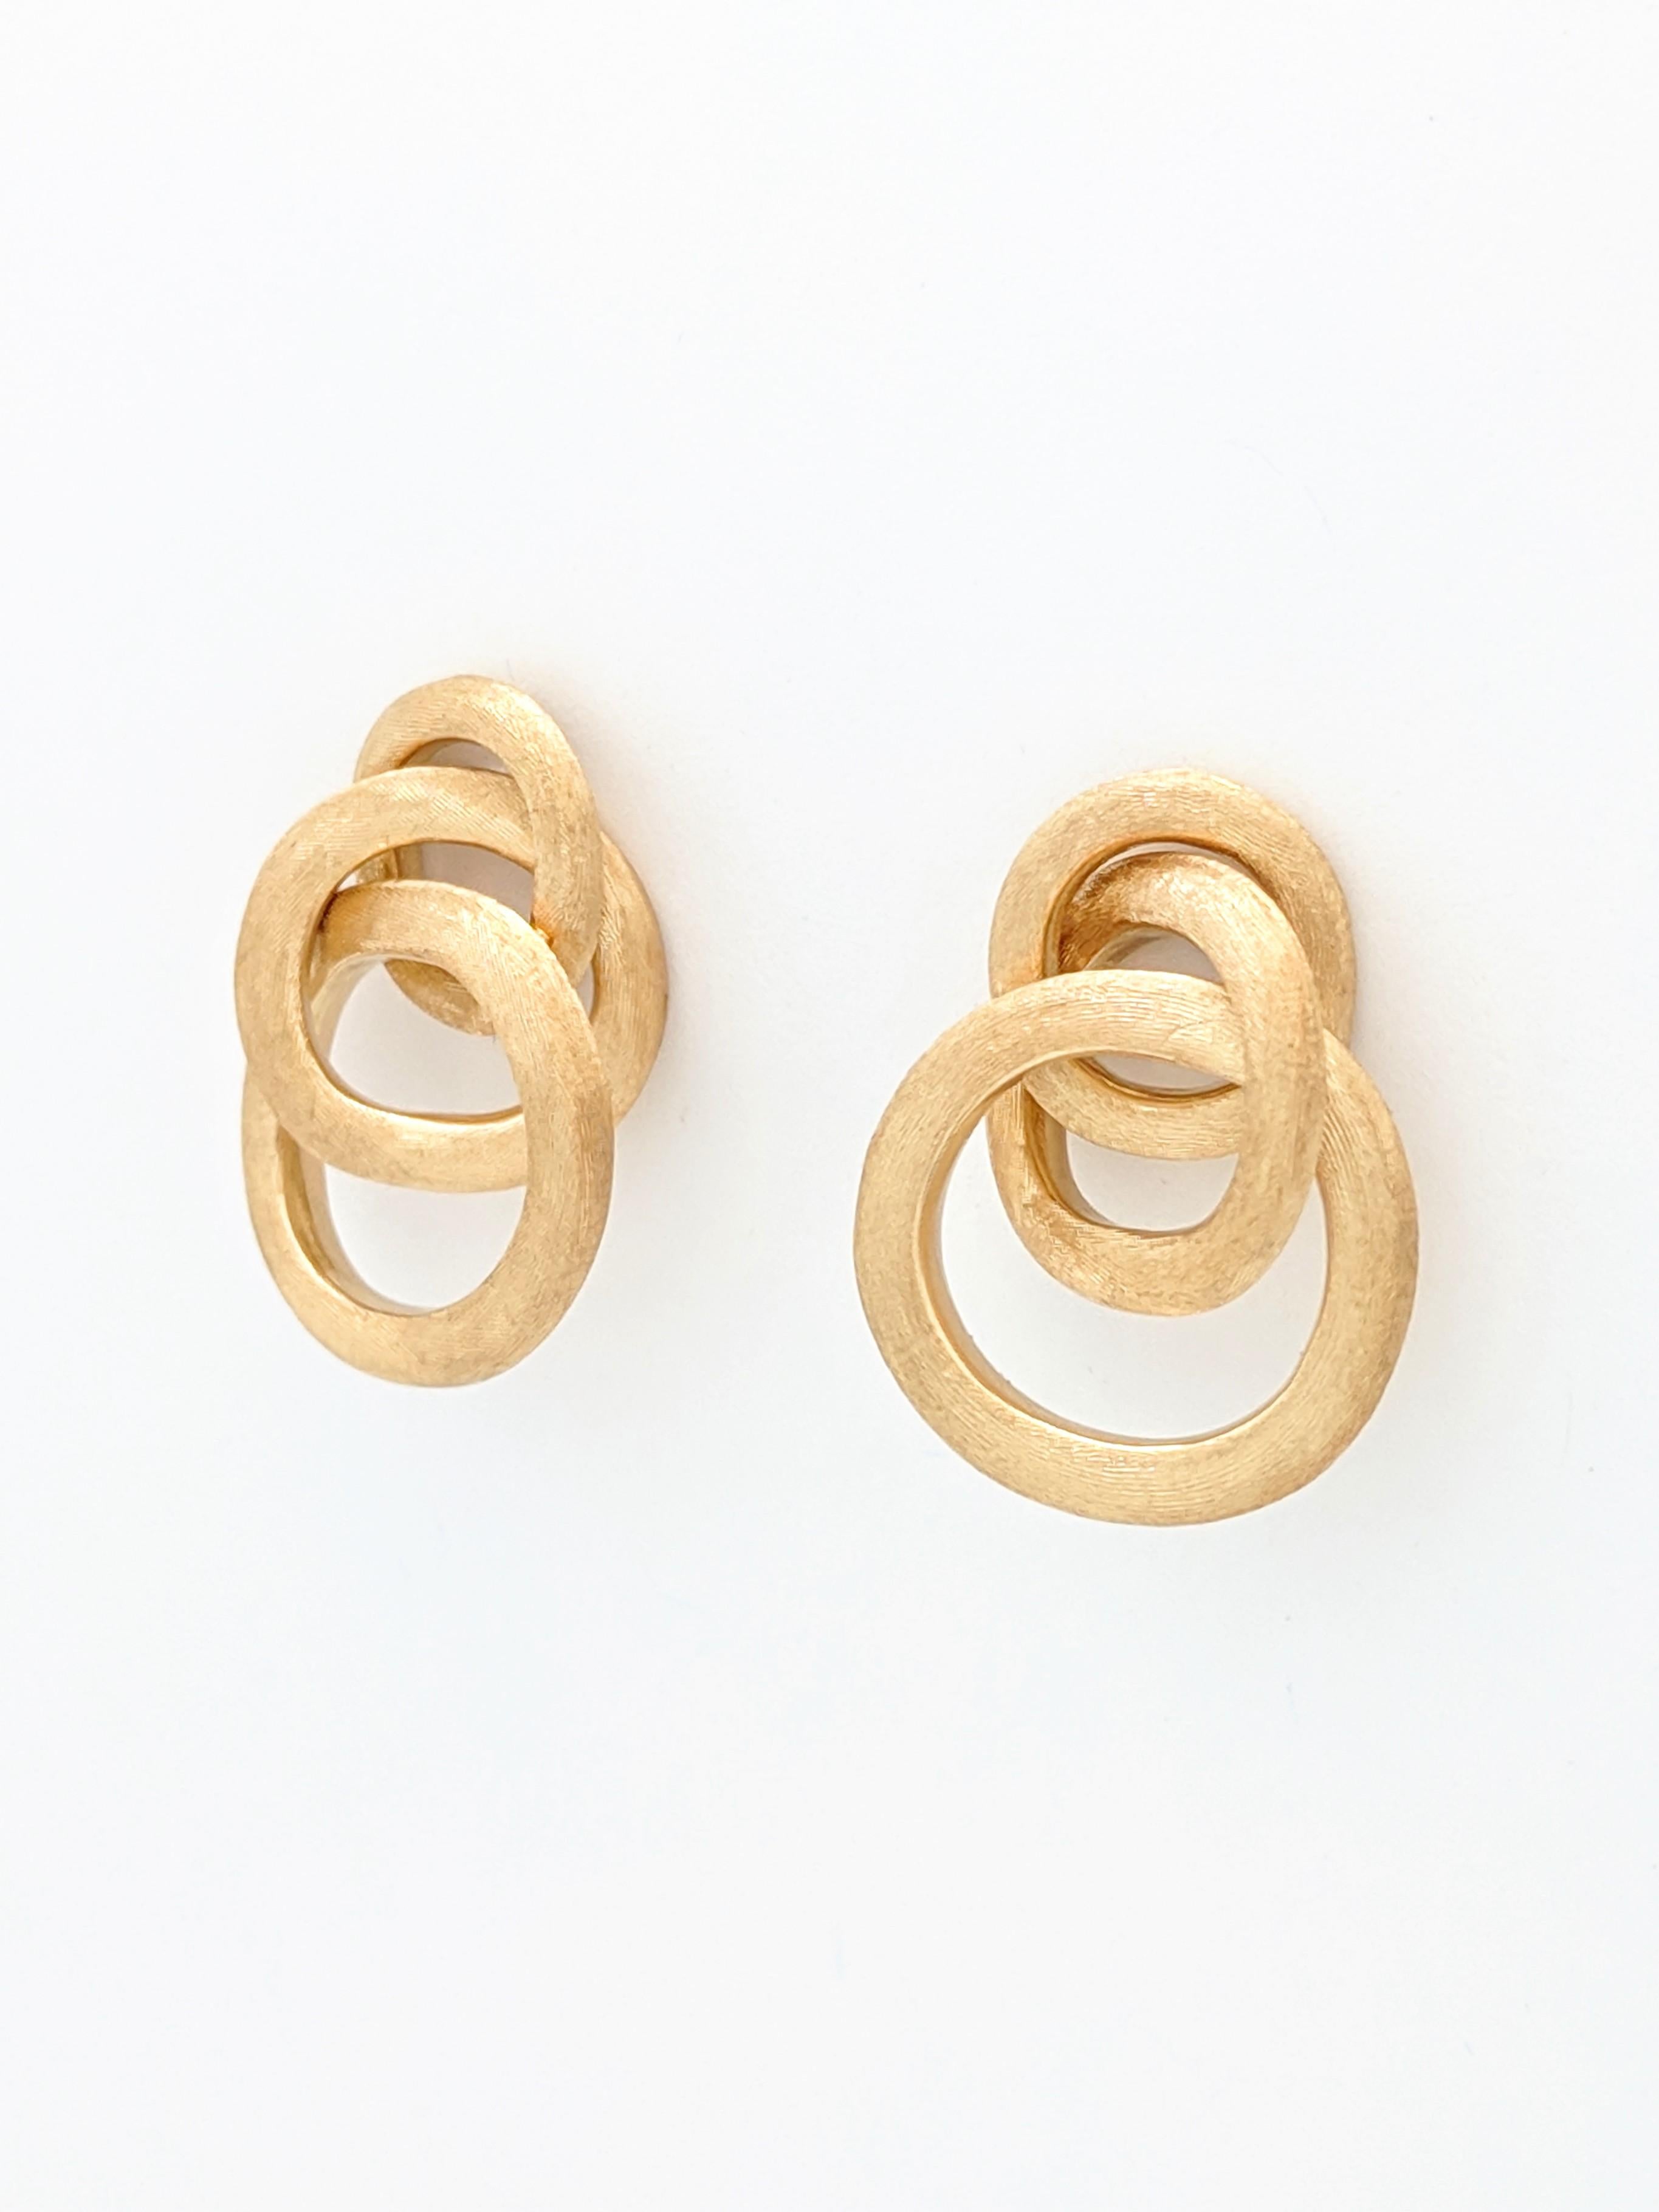 Women's Marco Bicego 18 Karat Yellow Gold Link Small Knot Earrings Jaipur Collection